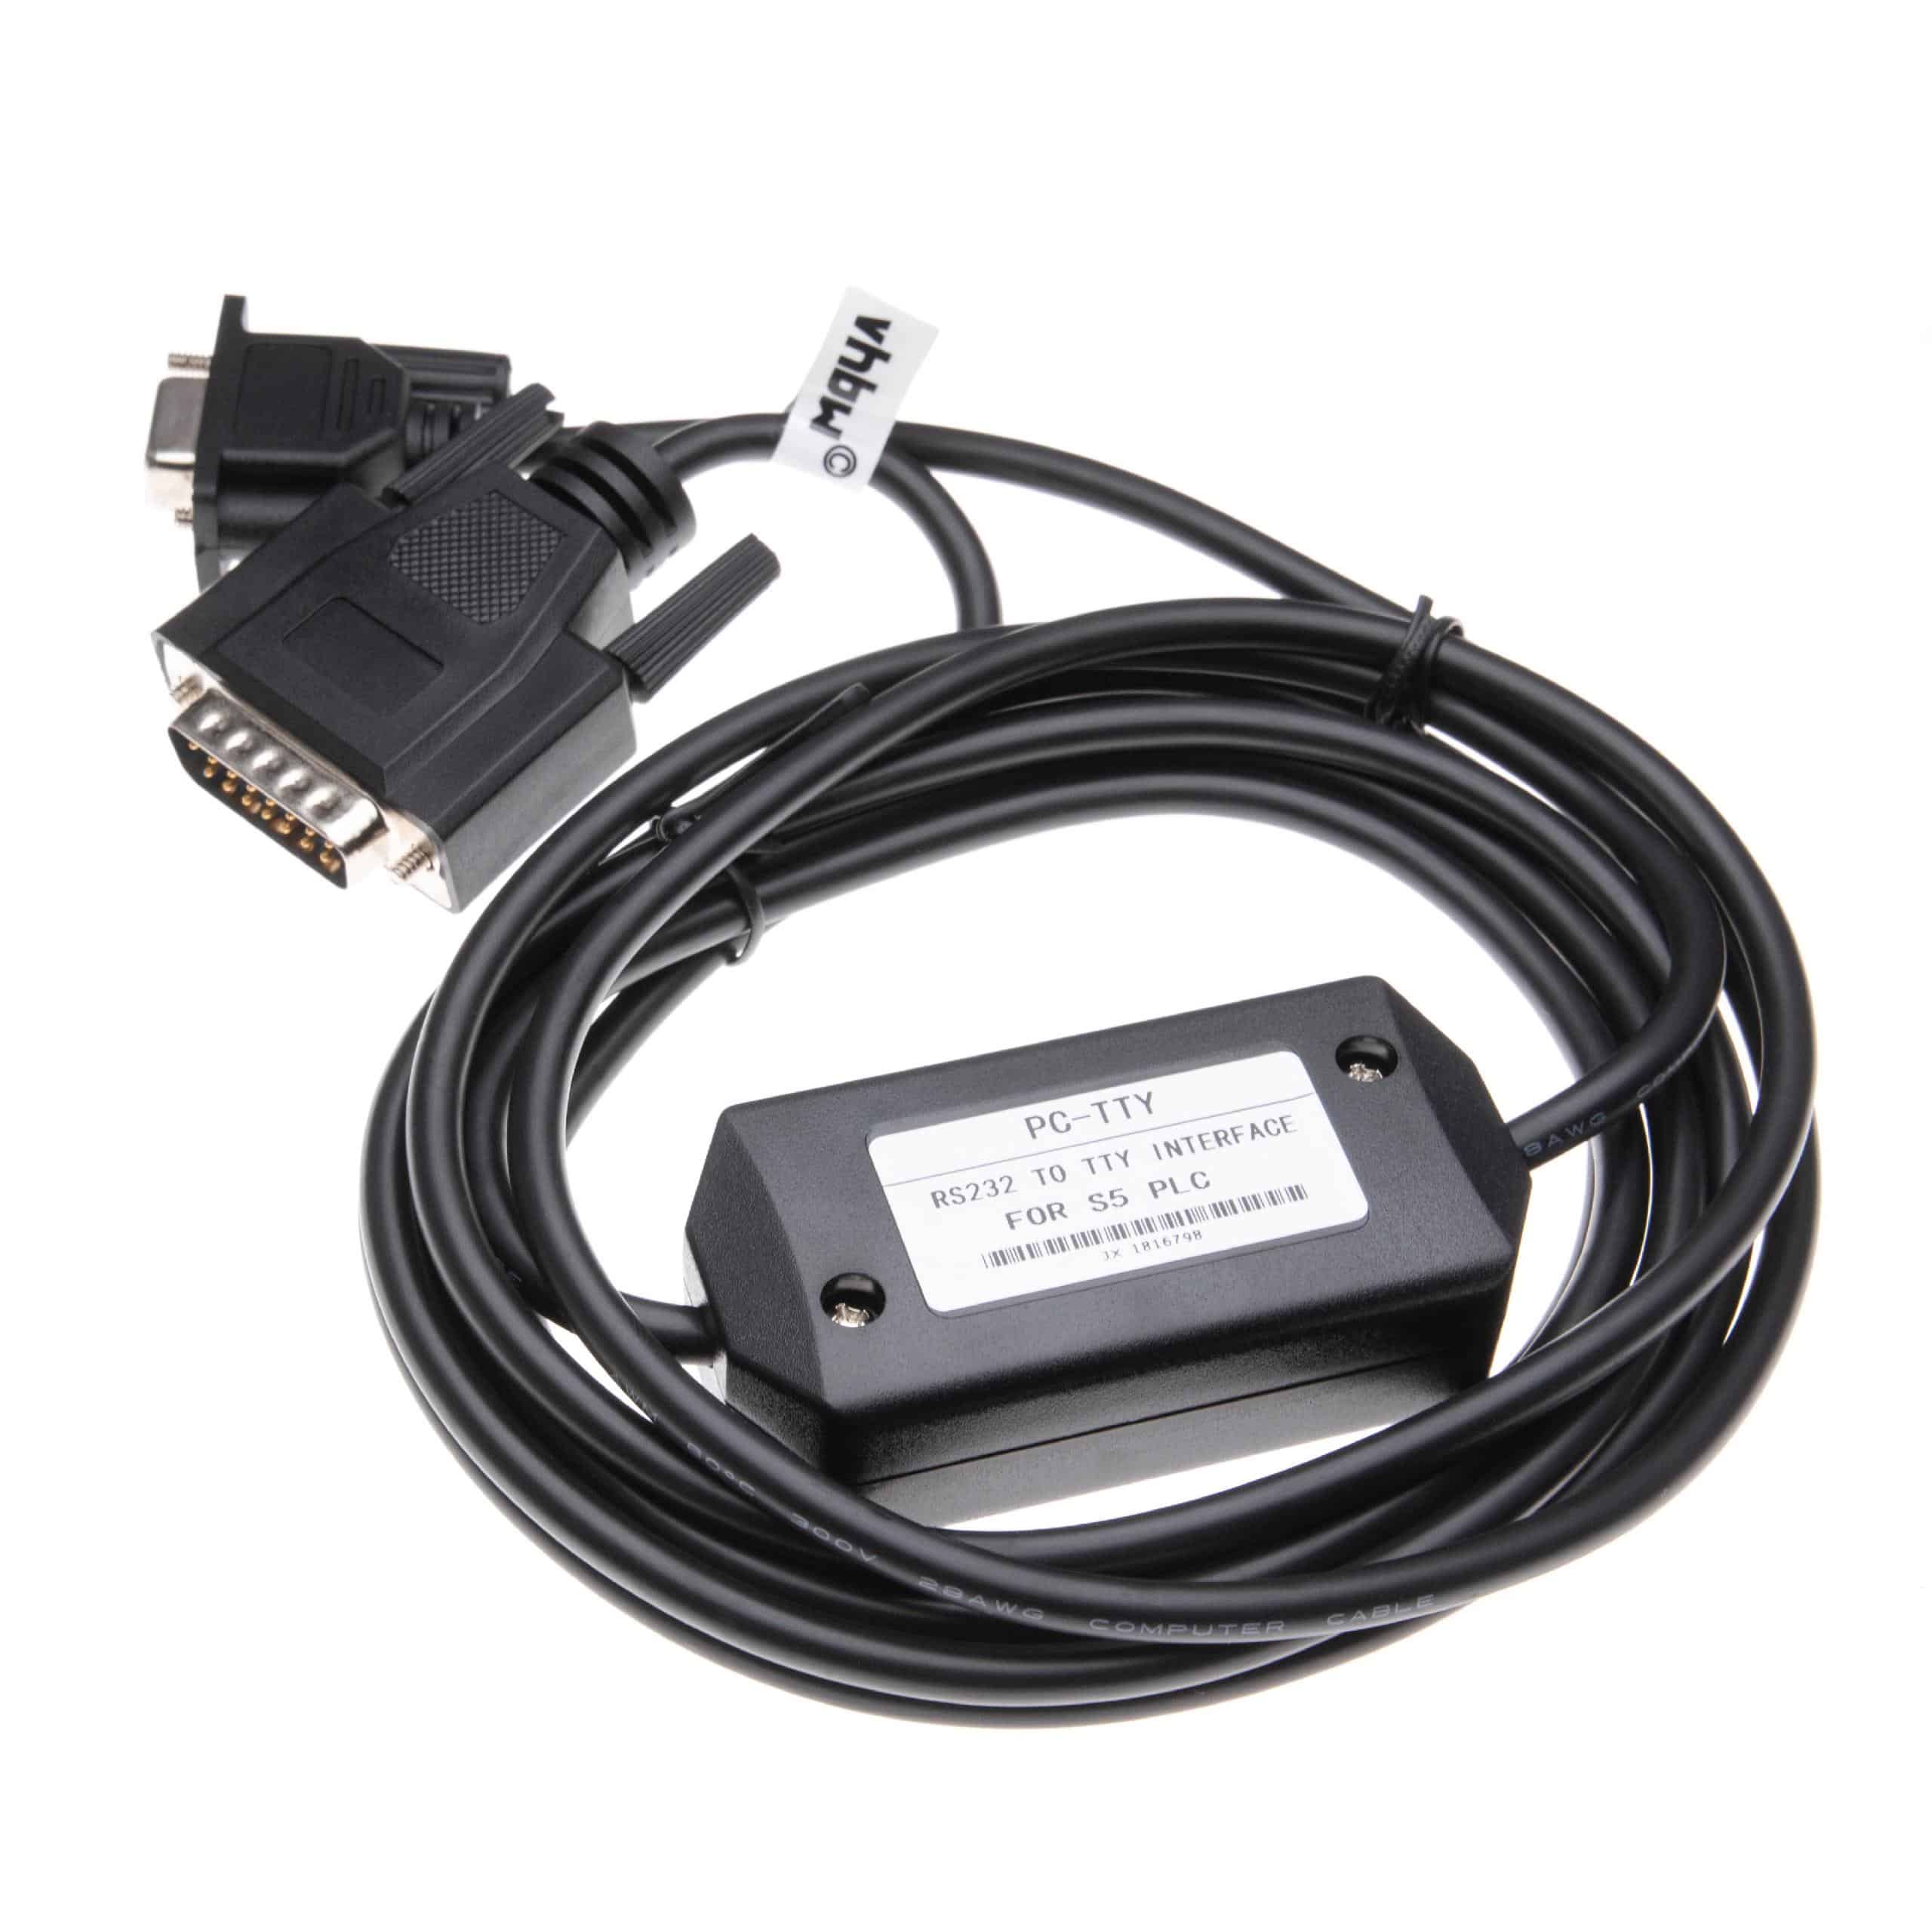 Programming Lead RS-232 suitable for CPU 100 Siemens Simatic S5 100U PC & Peripherals - Adapter 300cm, Black